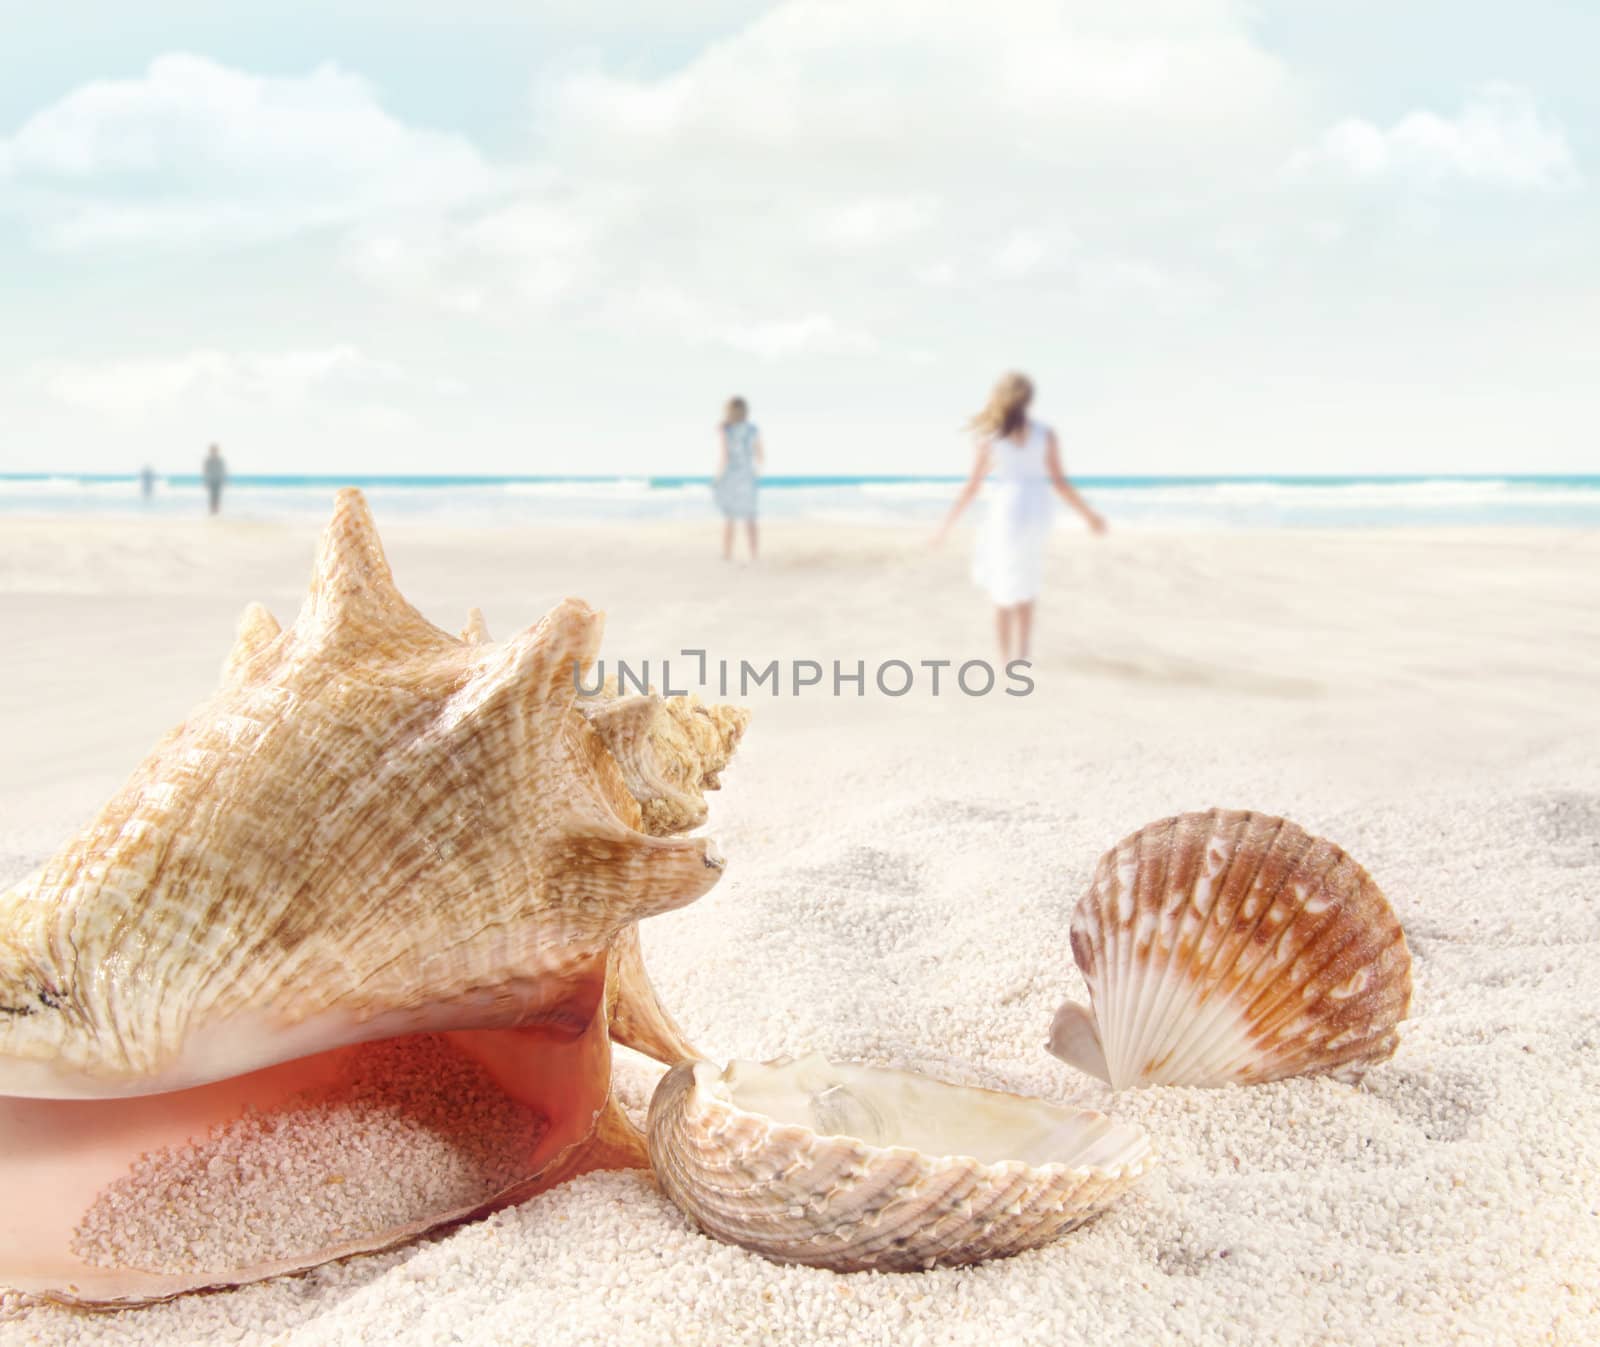 Beach scene with people walking and seashells by Sandralise